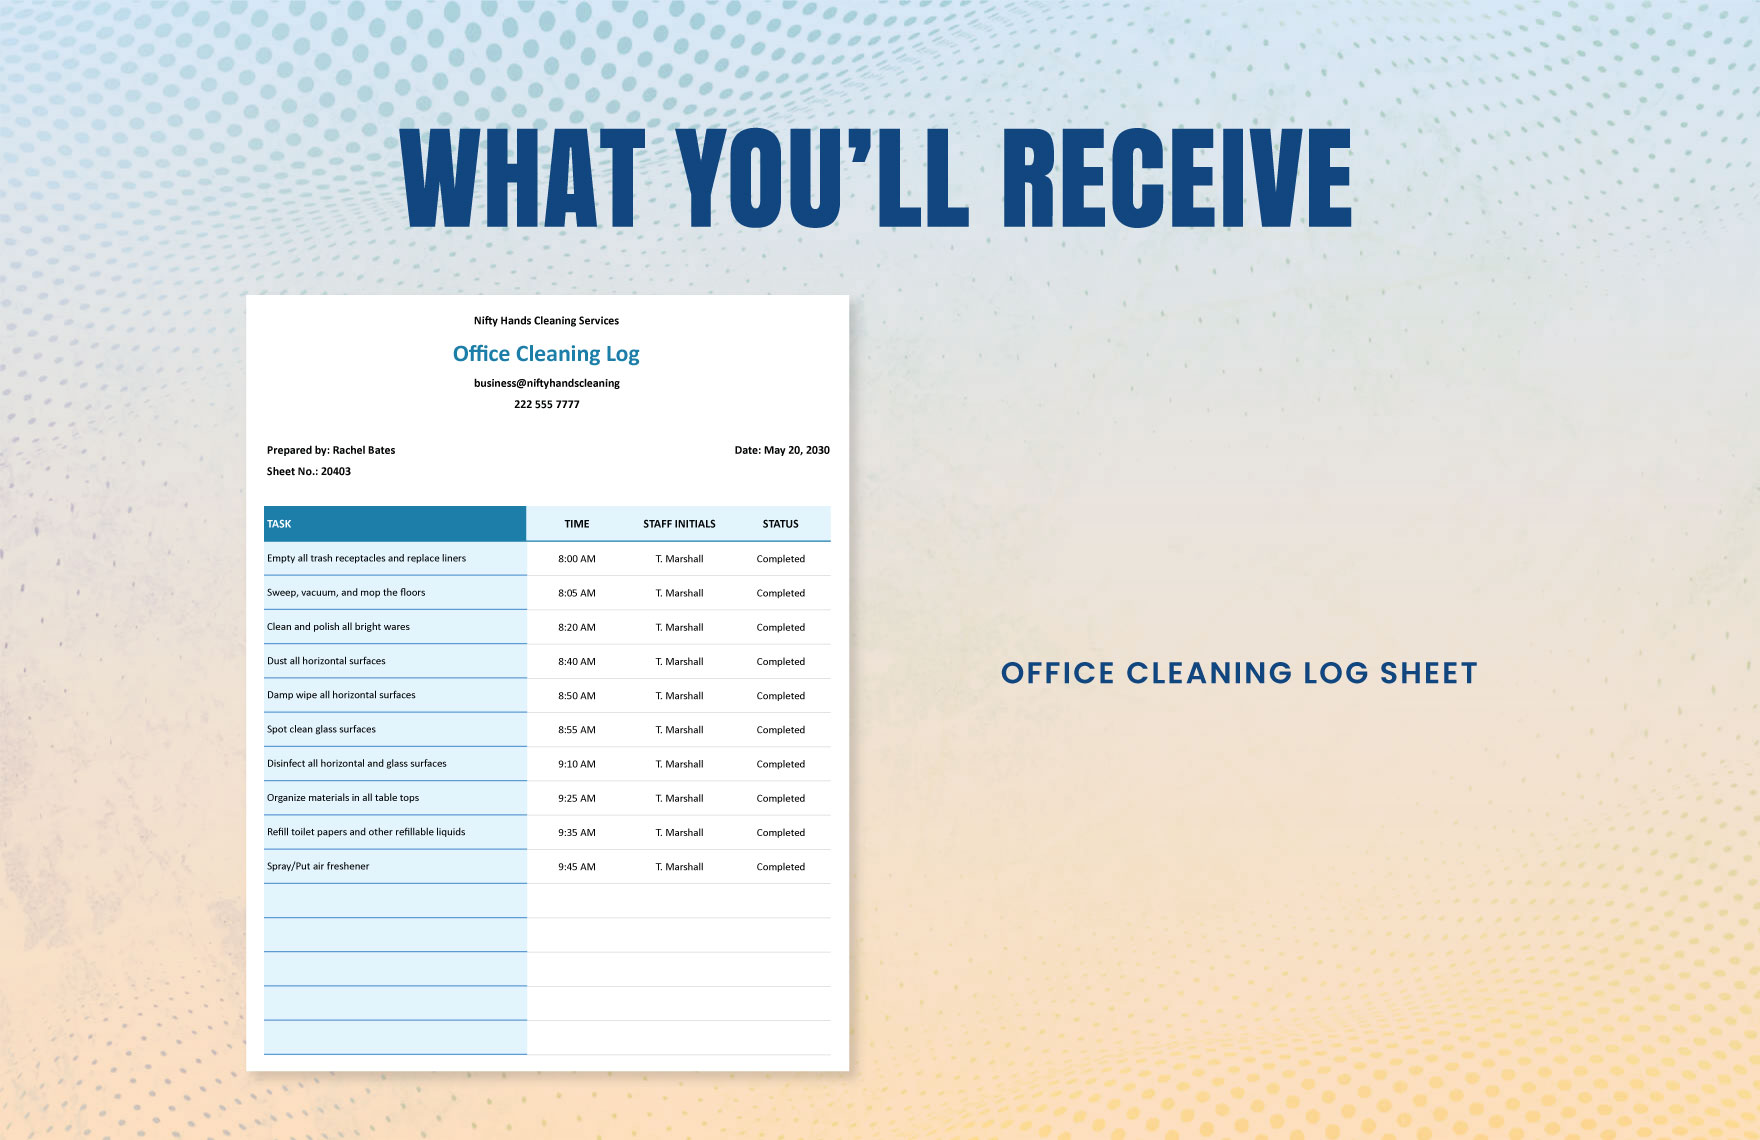 Office Cleaning Log Sheet Template